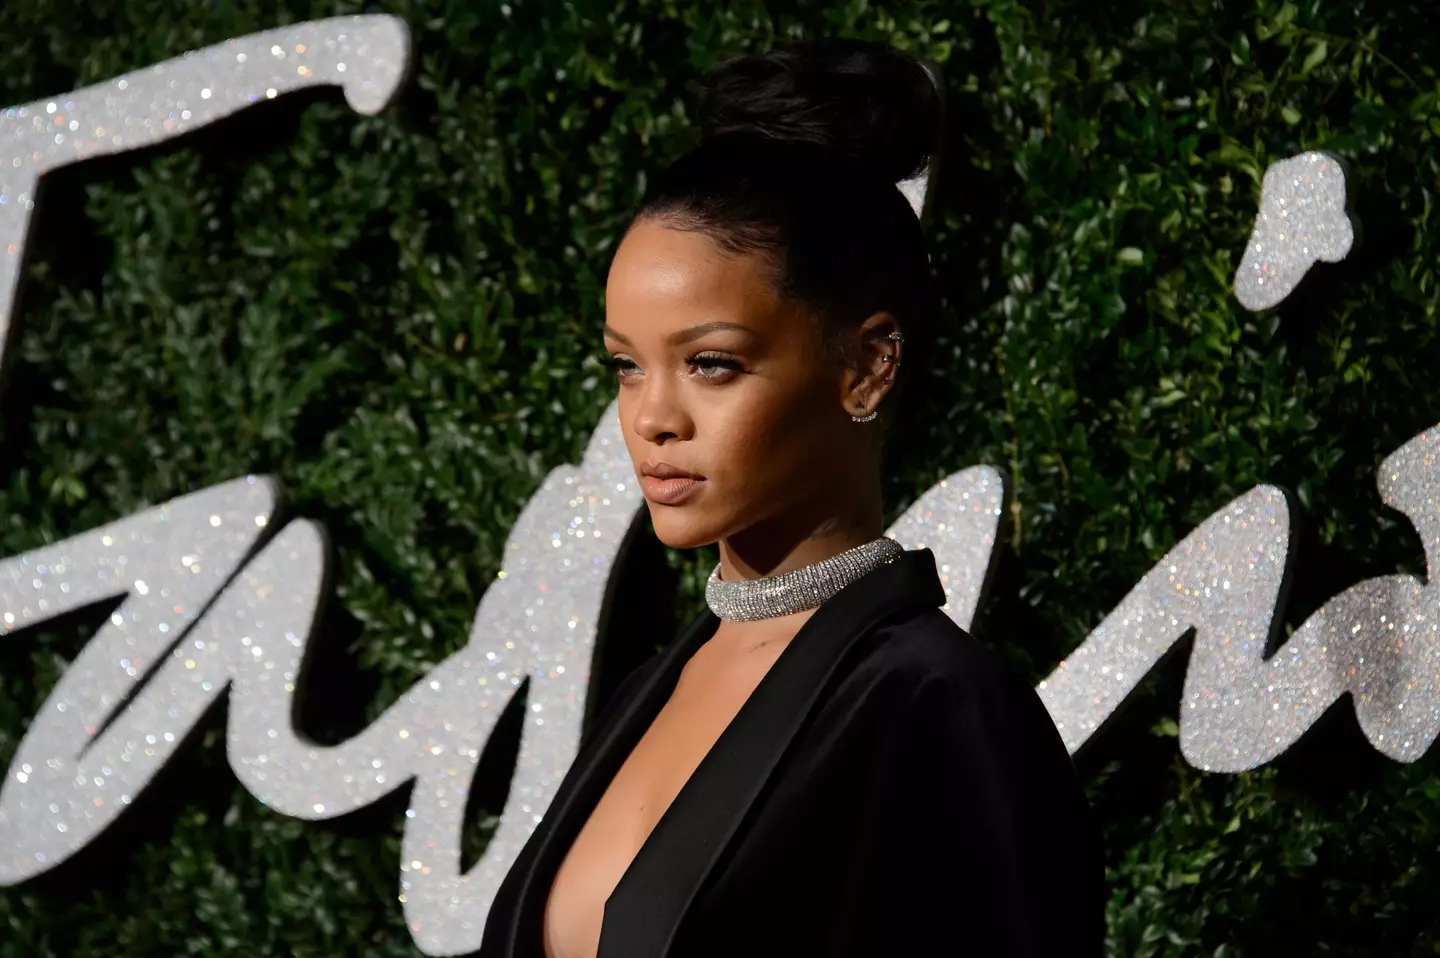 Rihanna is donating millions of dollars to help Barbados.